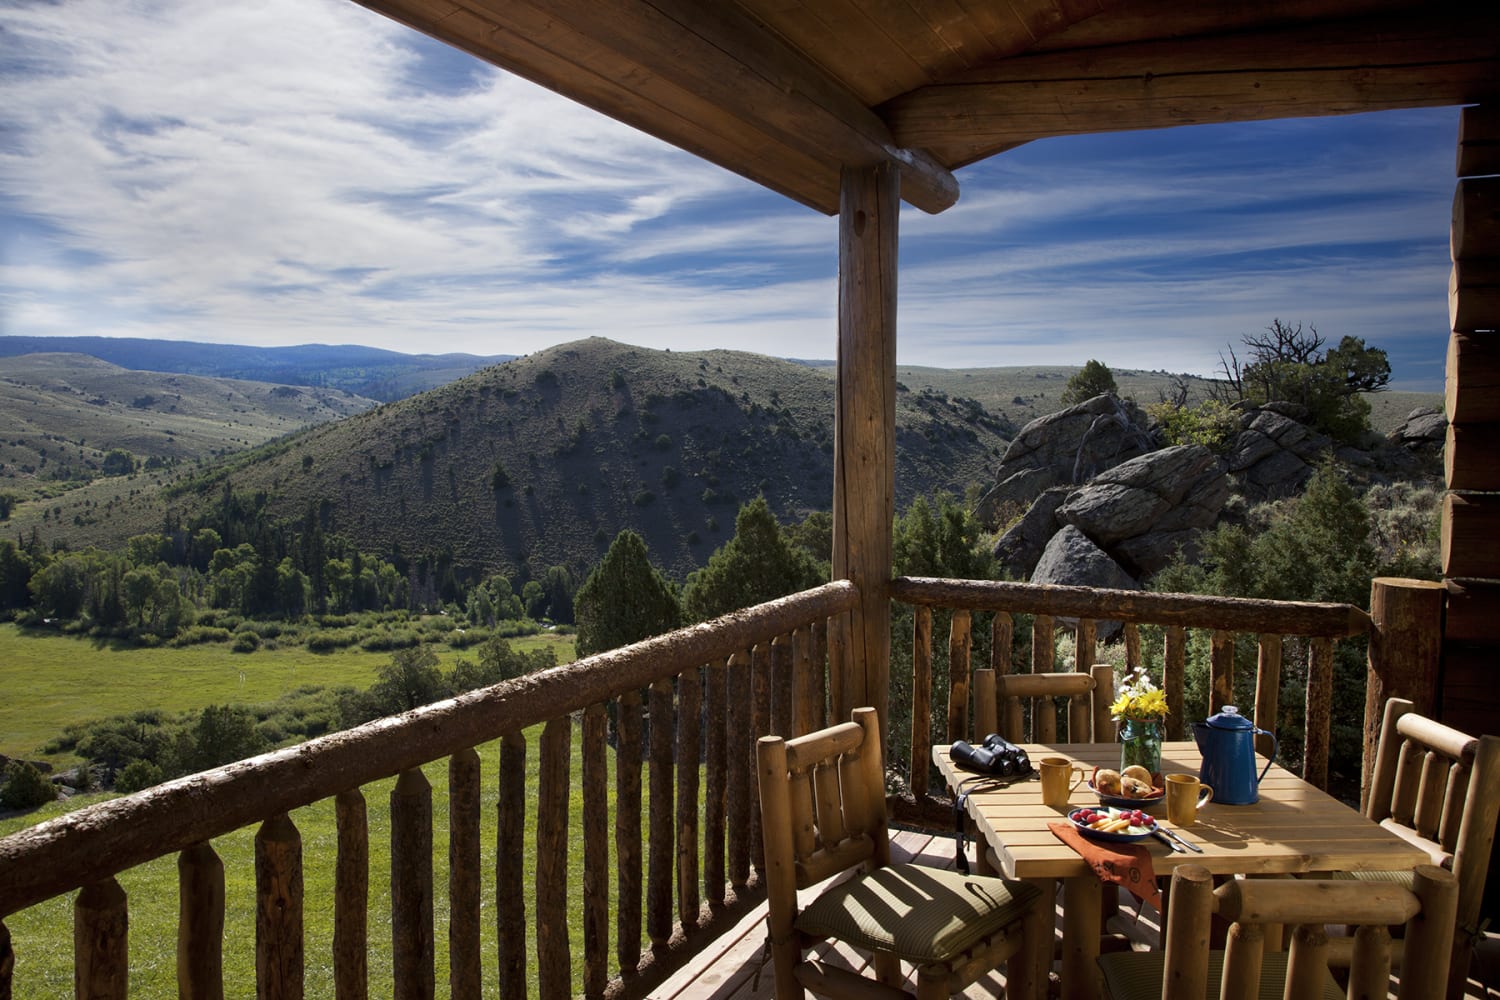 9 of the best romantic getaways in the United States